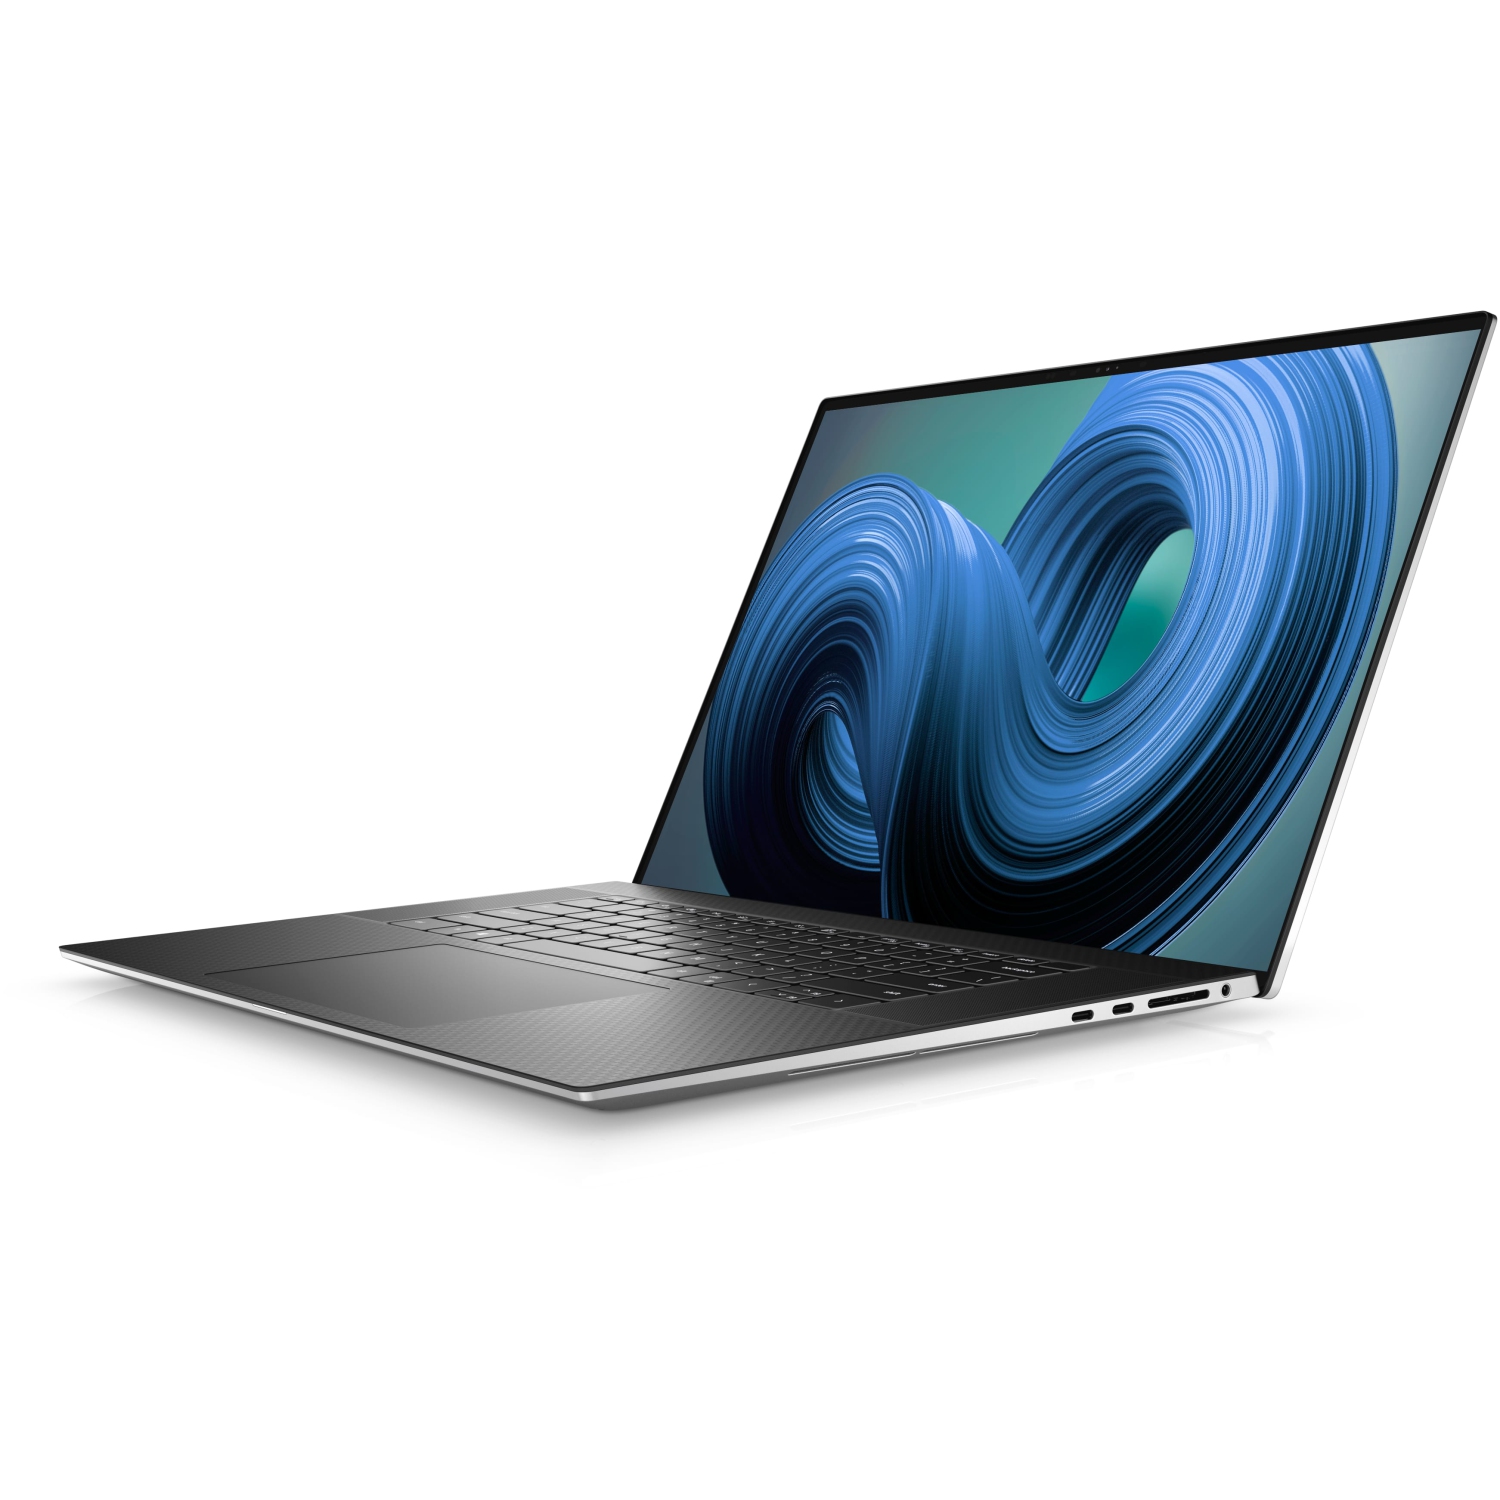 Refurbished (Excellent) – Dell XPS 9720 Laptop (2022) | 17" 4K Touch | Core i7 - 2TB SSD - 32GB RAM - RTX 3060 | 14 Cores @ 4.7 GHz - 12th Gen CPU - 12GB GDDR6